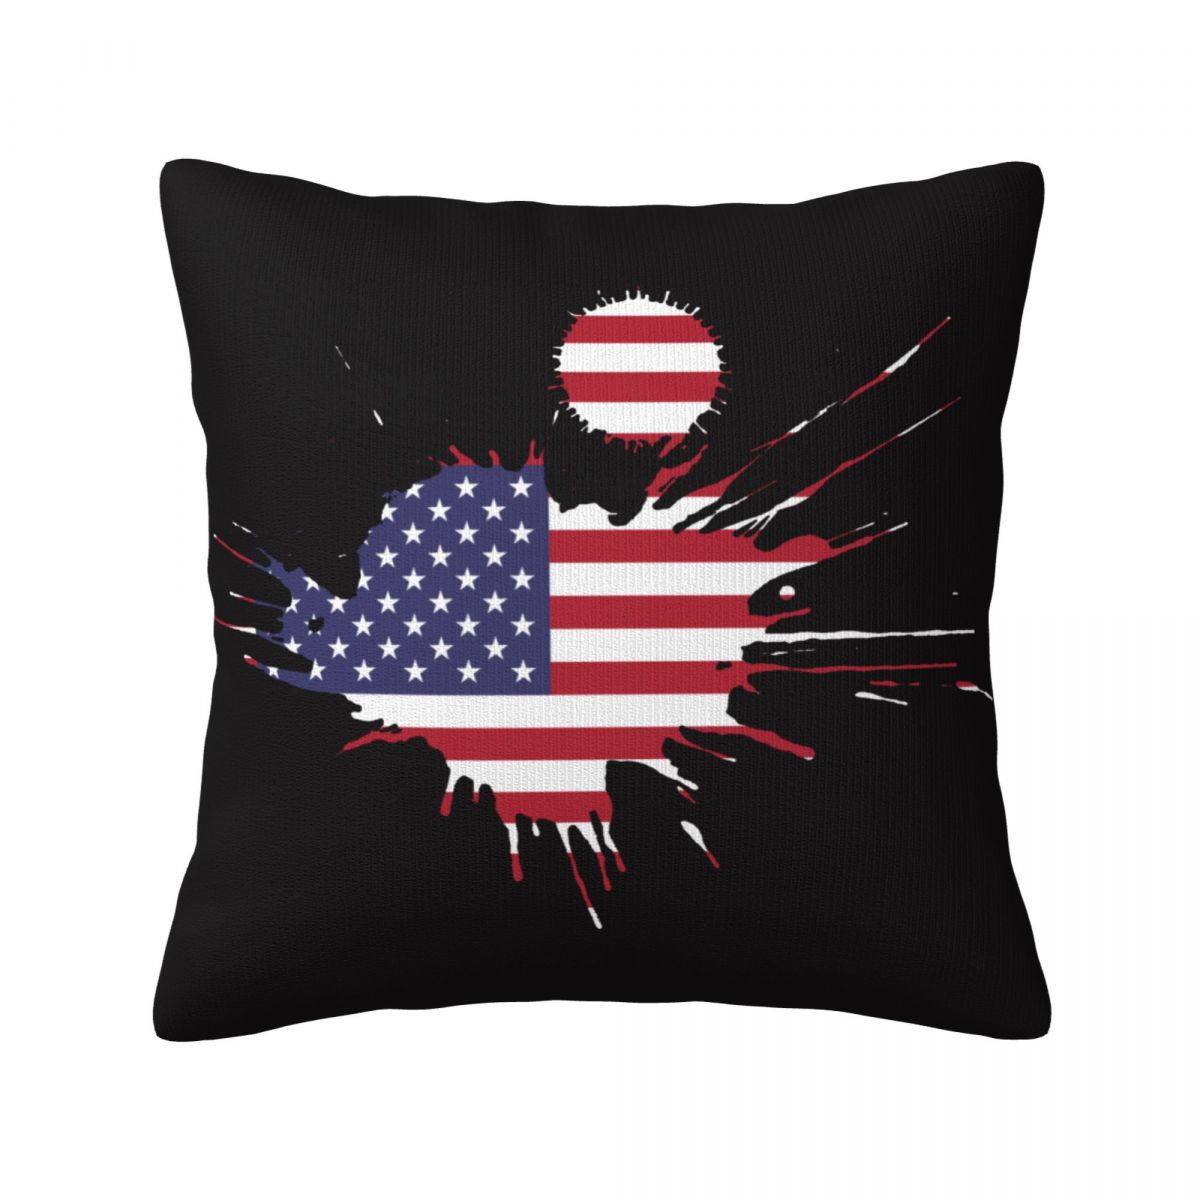 United States Ink Spatter Throw Pillows 18 x 18 inch